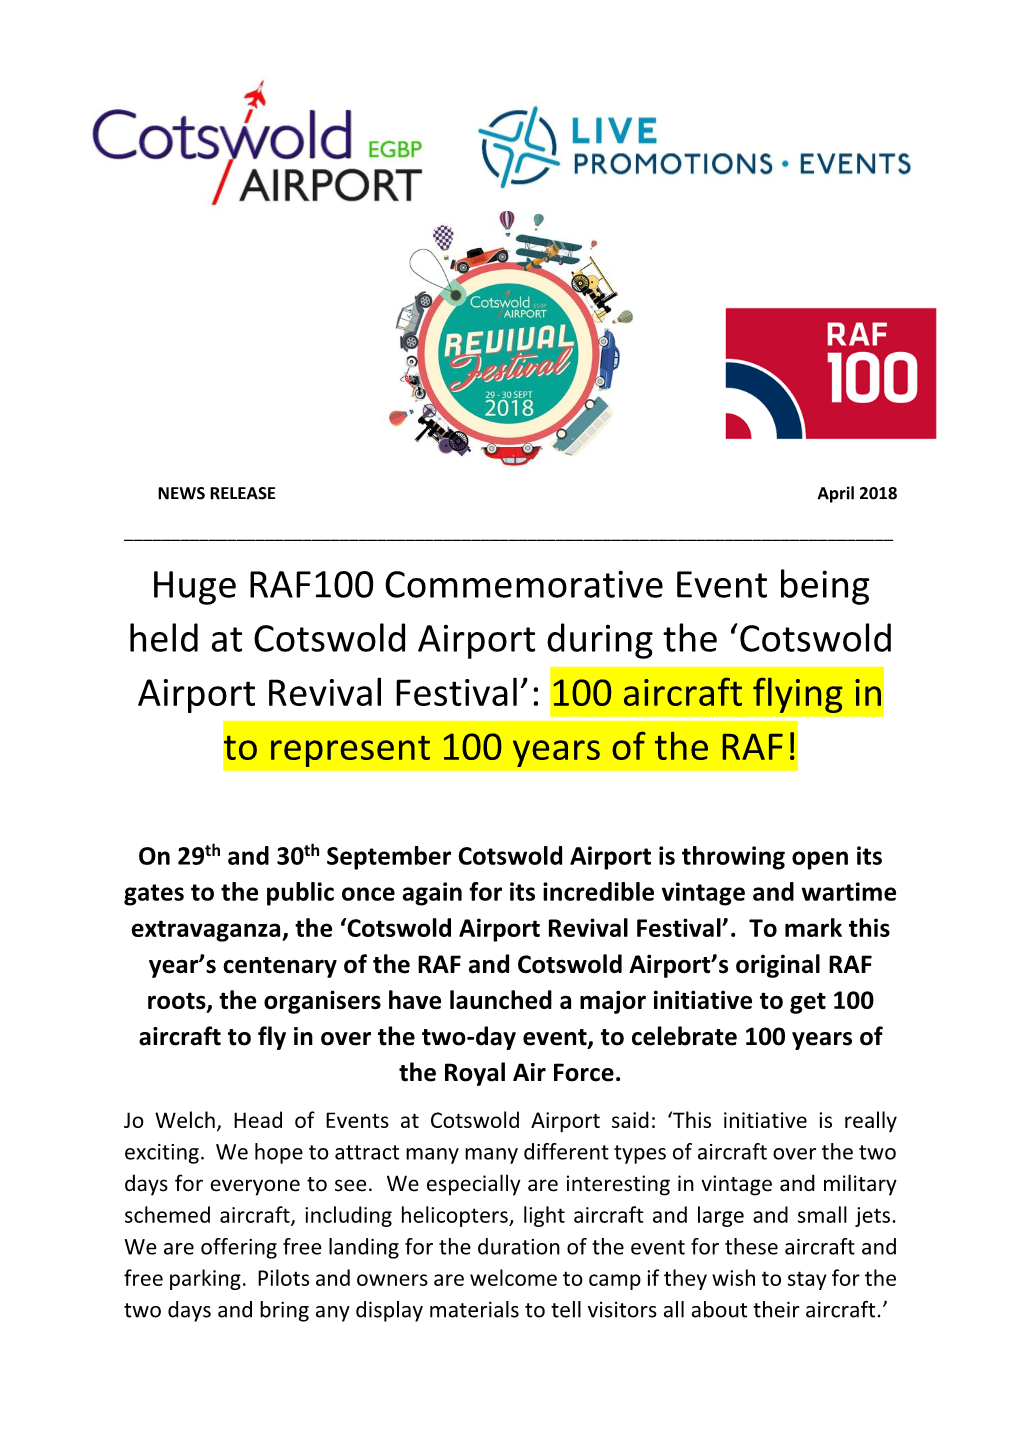 Huge RAF100 Commemorative Event Being Held at Cotswold Airport During the 'Cotswold Airport Revival Festival': 100 Aircraft